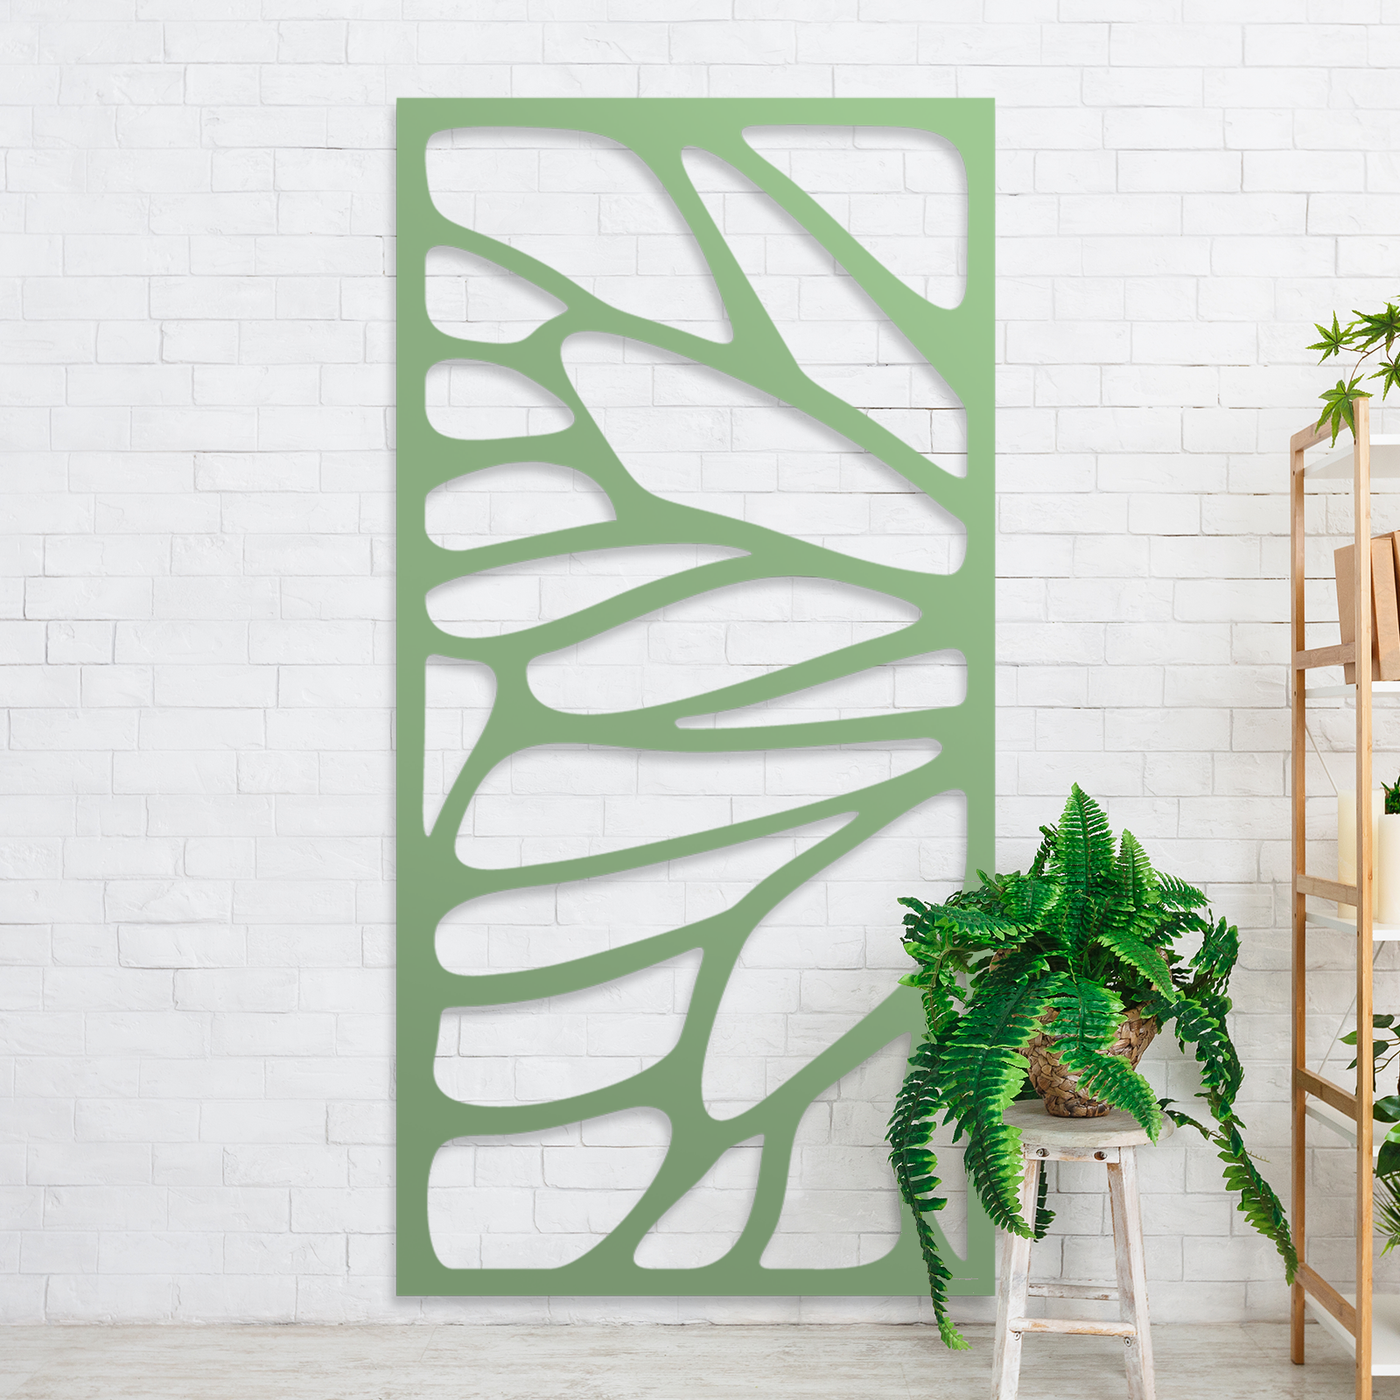 Bee Wing Metal Garden Screen: Quality You Can Count On